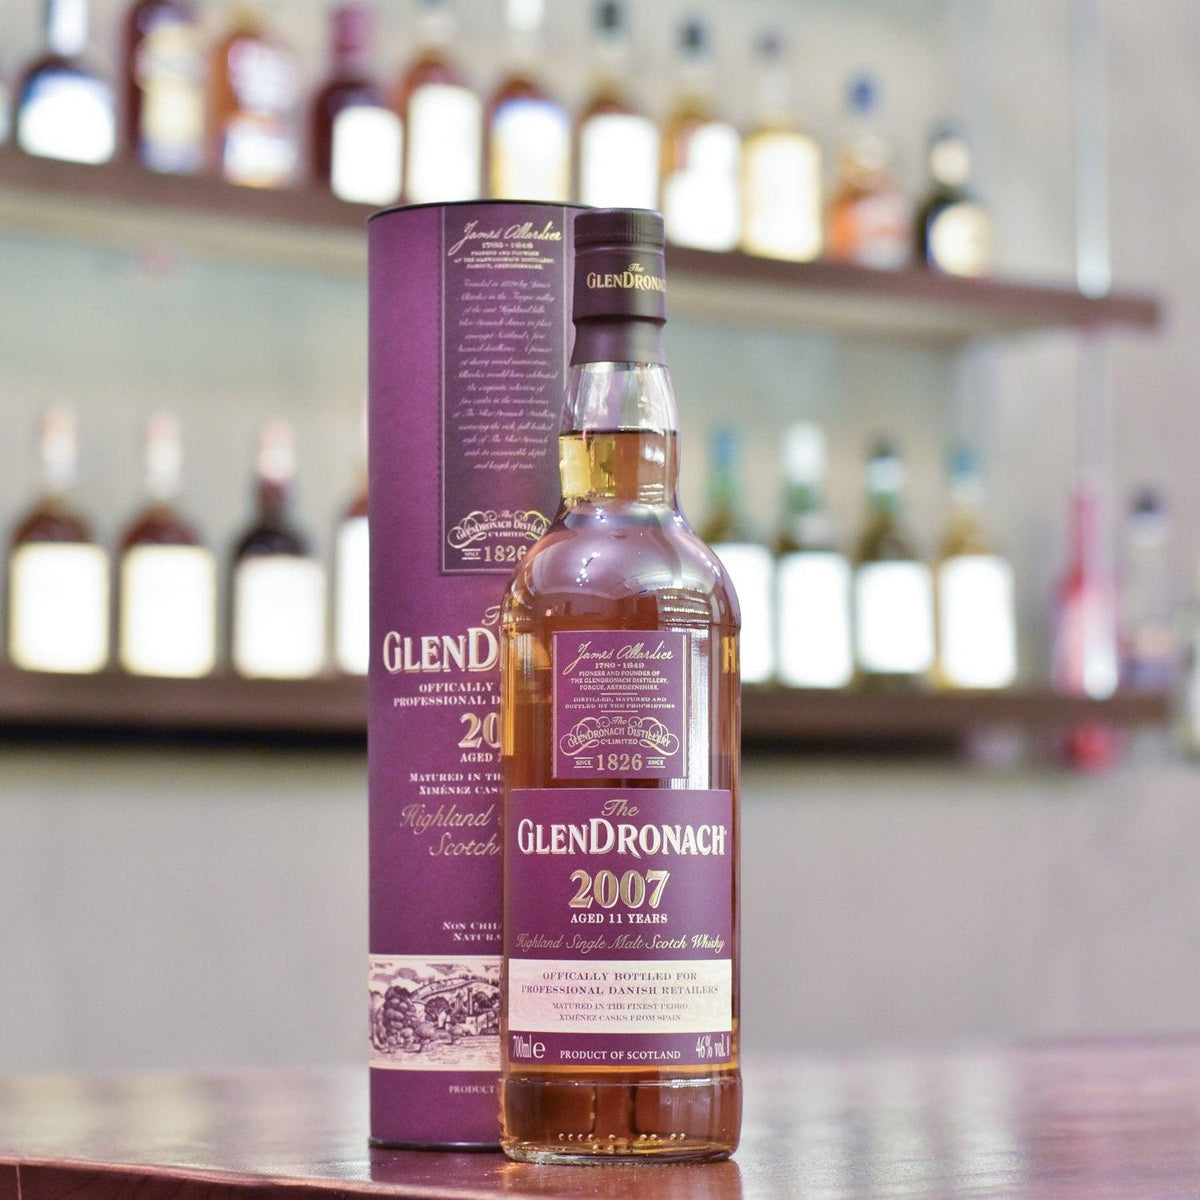 Glendronach 11 Year Old 2007 for Professional Danish Whisky Retailers - The Rare Malt